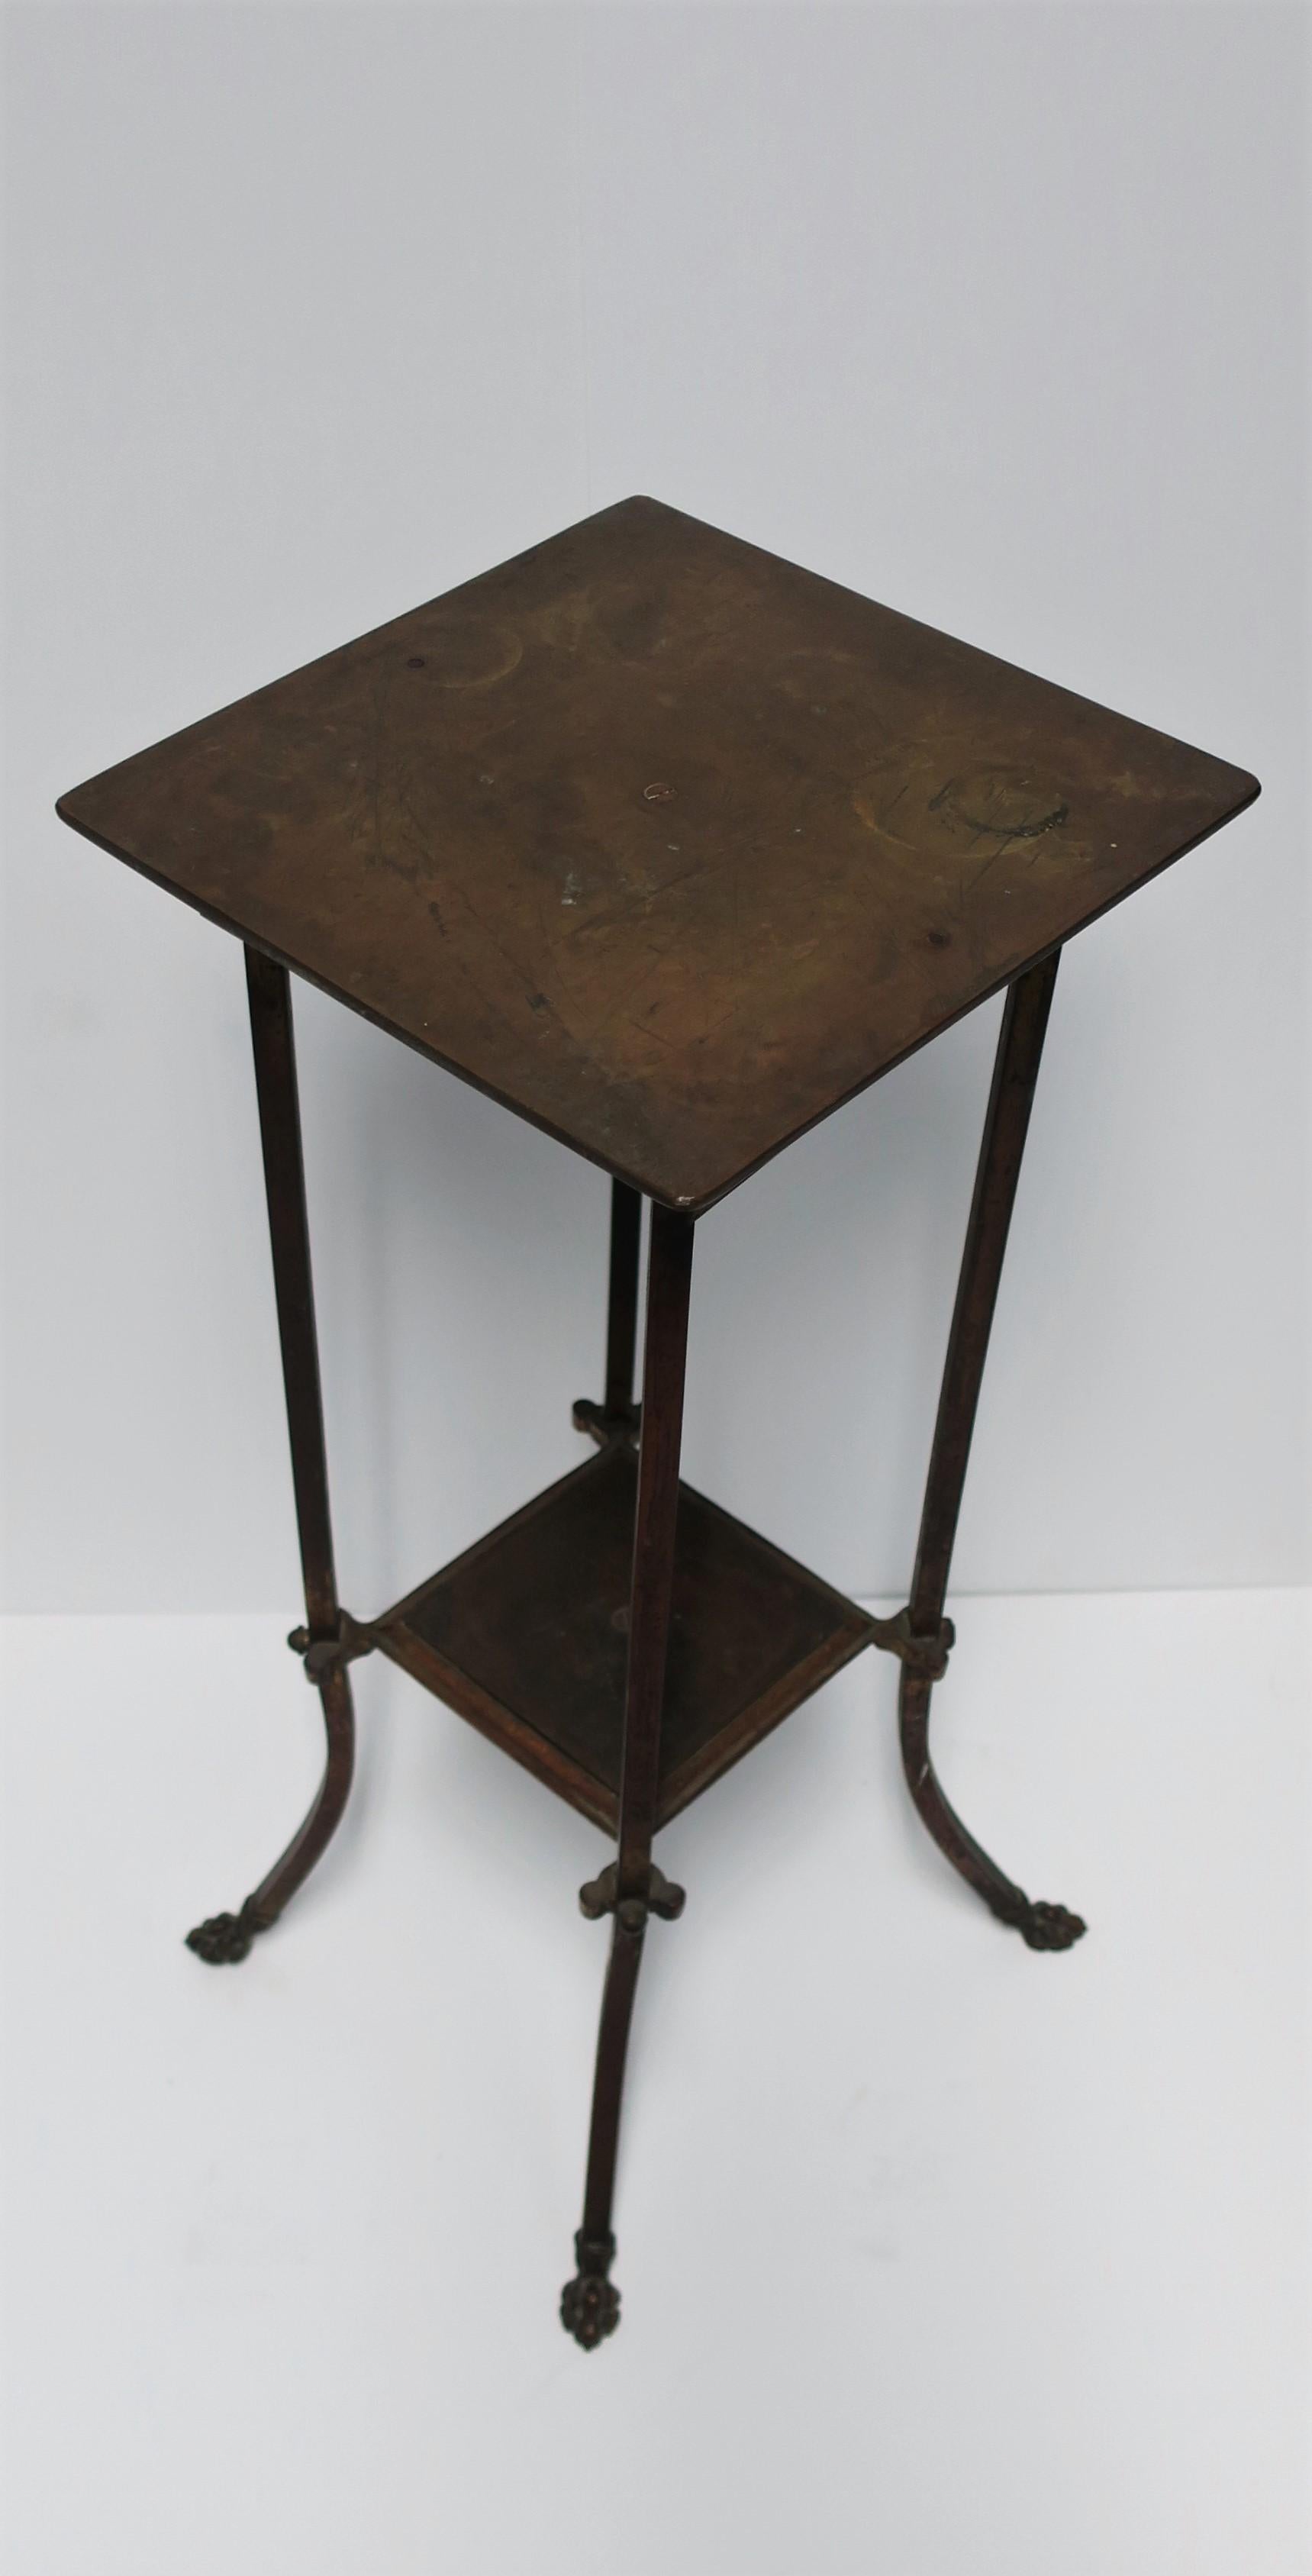 Victorian Bronze Pedestal Table with Shelf and Decorative Paw Feet, circa 19th Century